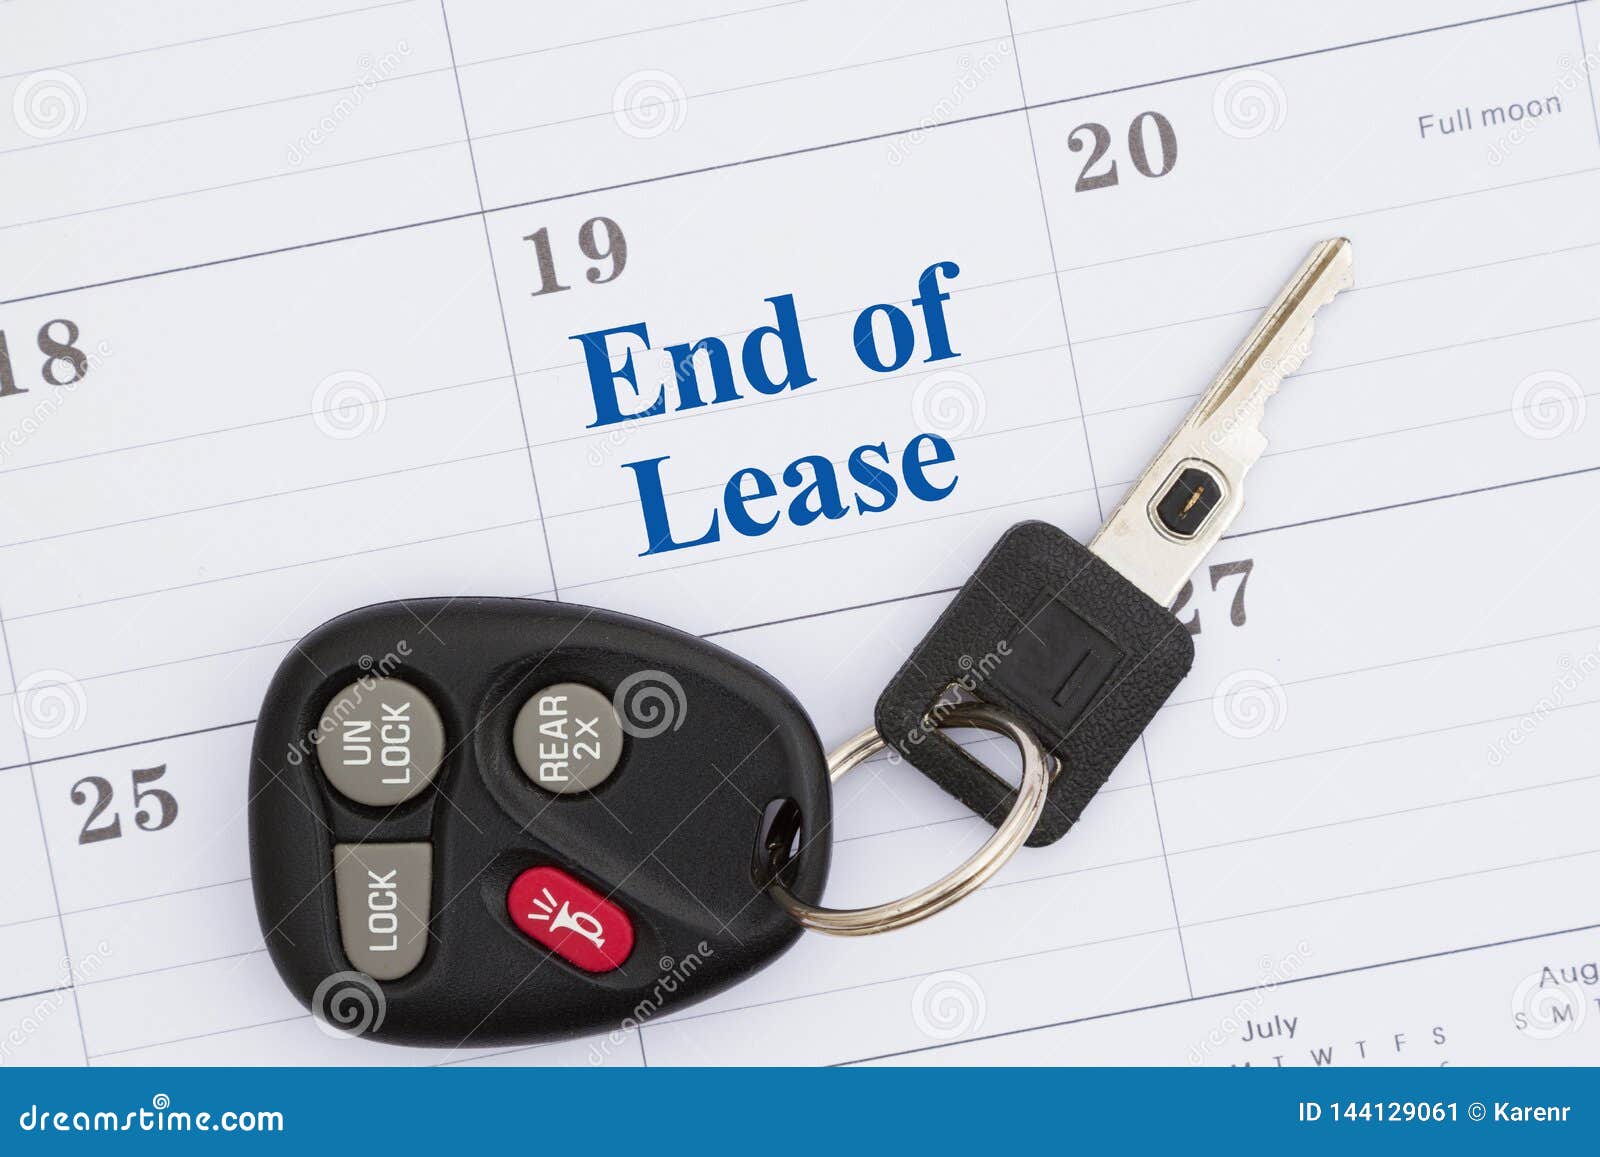 end of lease message with monthly calendar with car keys